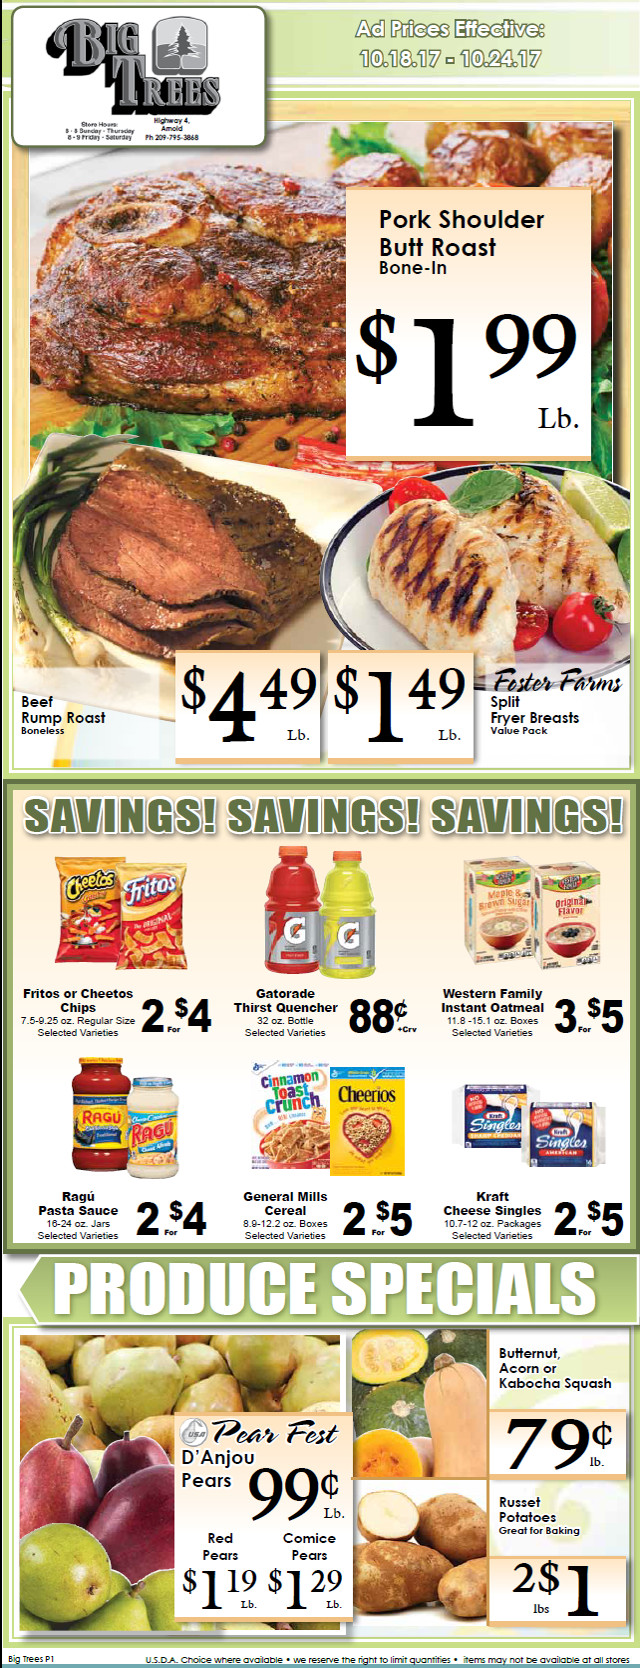 Big Trees Market Weekly Ad & Grocery Specials Though October 24th